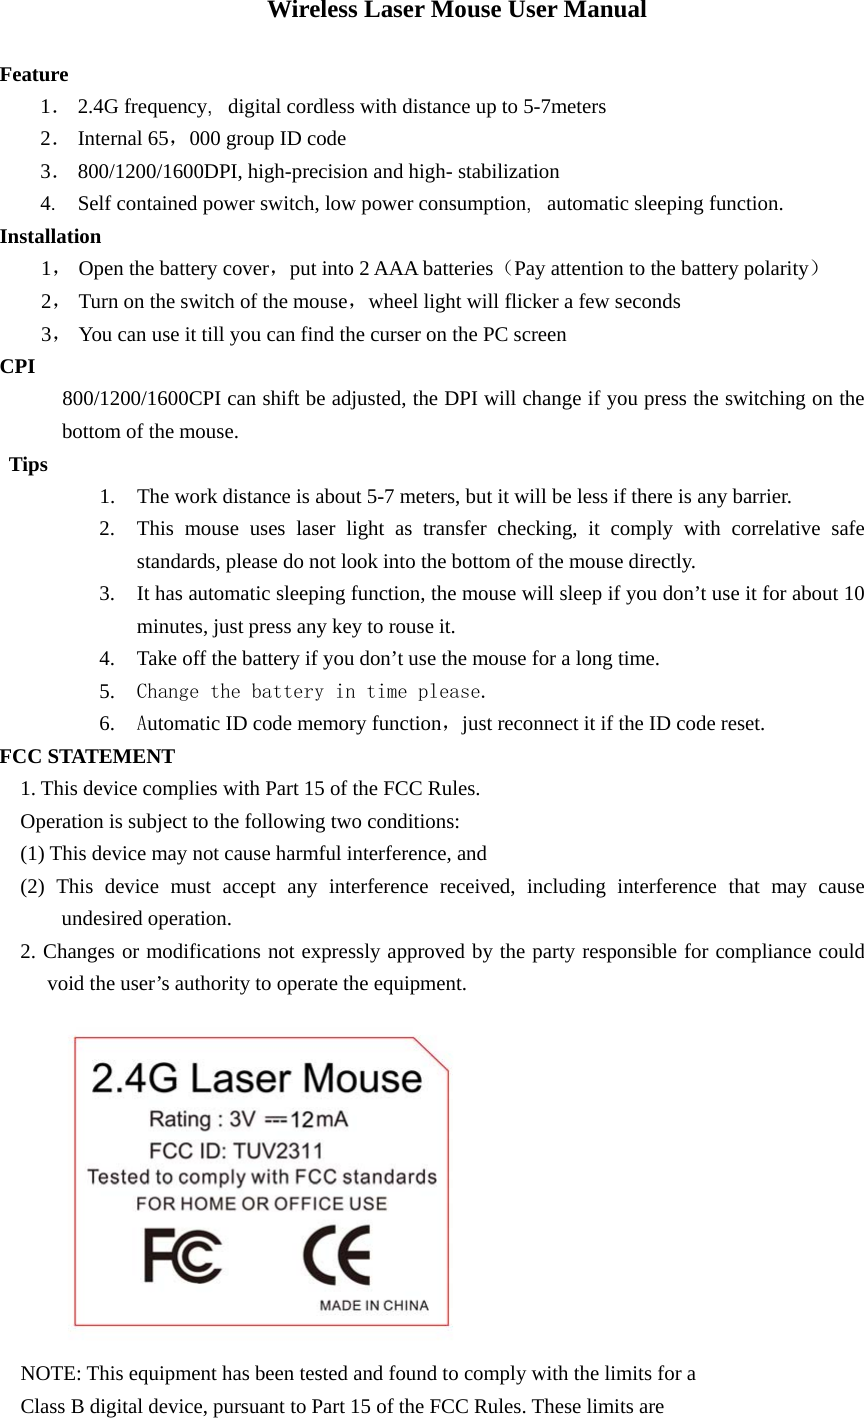 Wireless Laser Mouse User Manual  Feature 1． 2.4G frequency，digital cordless with distance up to 5-7meters   2． Internal 65，000 group ID code 3． 800/1200/1600DPI, high-precision and high- stabilization 4． Self contained power switch, low power consumption，automatic sleeping function. Installation 1， Open the battery cover，put into 2 AAA batteries（Pay attention to the battery polarity） 2， Turn on the switch of the mouse，wheel light will flicker a few seconds 3， You can use it till you can find the curser on the PC screen CPI      800/1200/1600CPI can shift be adjusted, the DPI will change if you press the switching on the bottom of the mouse. Tips 1. The work distance is about 5-7 meters, but it will be less if there is any barrier. 2. This mouse uses laser light as transfer checking, it comply with correlative safe standards, please do not look into the bottom of the mouse directly. 3. It has automatic sleeping function, the mouse will sleep if you don’t use it for about 10 minutes, just press any key to rouse it. 4. Take off the battery if you don’t use the mouse for a long time. 5. Change the battery in time please. 6. Automatic ID code memory function，just reconnect it if the ID code reset.   FCC STATEMENT 1. This device complies with Part 15 of the FCC Rules. Operation is subject to the following two conditions: (1) This device may not cause harmful interference, and (2) This device must accept any interference received, including interference that may cause undesired operation. 2. Changes or modifications not expressly approved by the party responsible for compliance could void the user’s authority to operate the equipment.    NOTE: This equipment has been tested and found to comply with the limits for a Class B digital device, pursuant to Part 15 of the FCC Rules. These limits are 